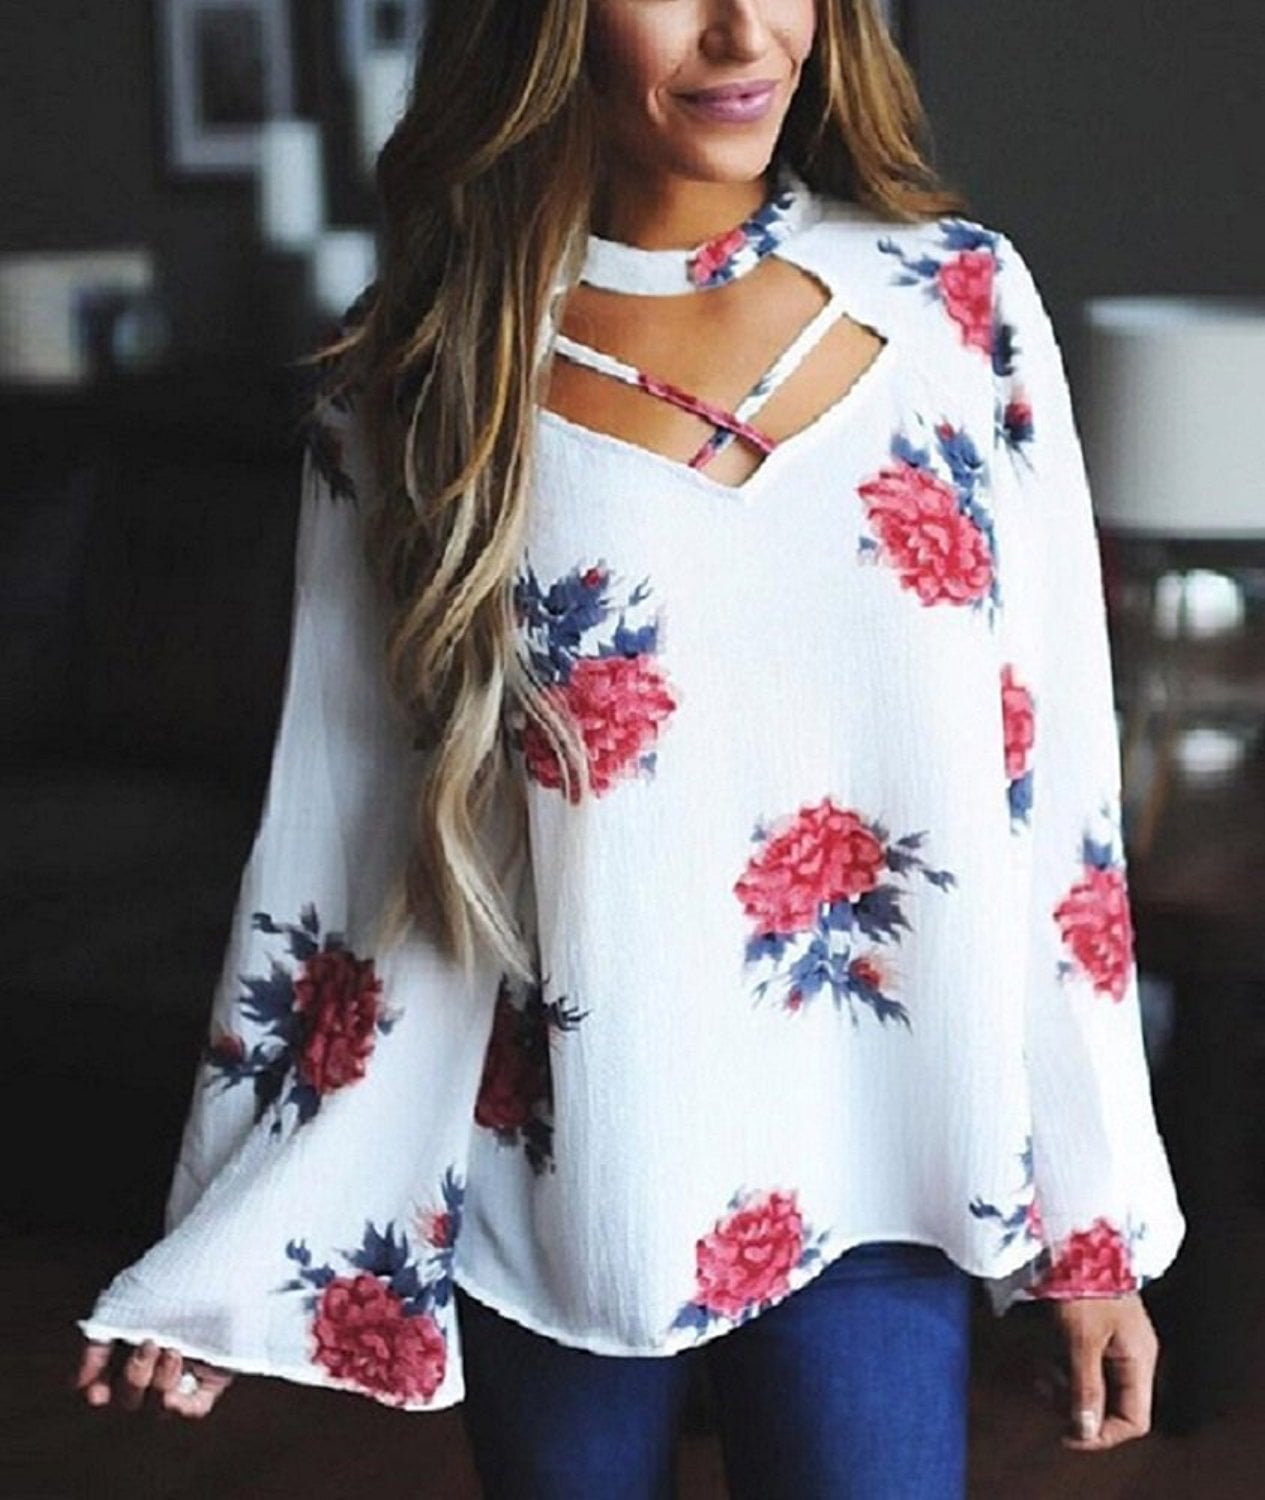 angst killing fryser New Floral Top | These 7 Floral Tops Are Ridiculously Pretty For Spring . .  . and All Under $17 on Amazon | POPSUGAR Fashion Photo 2